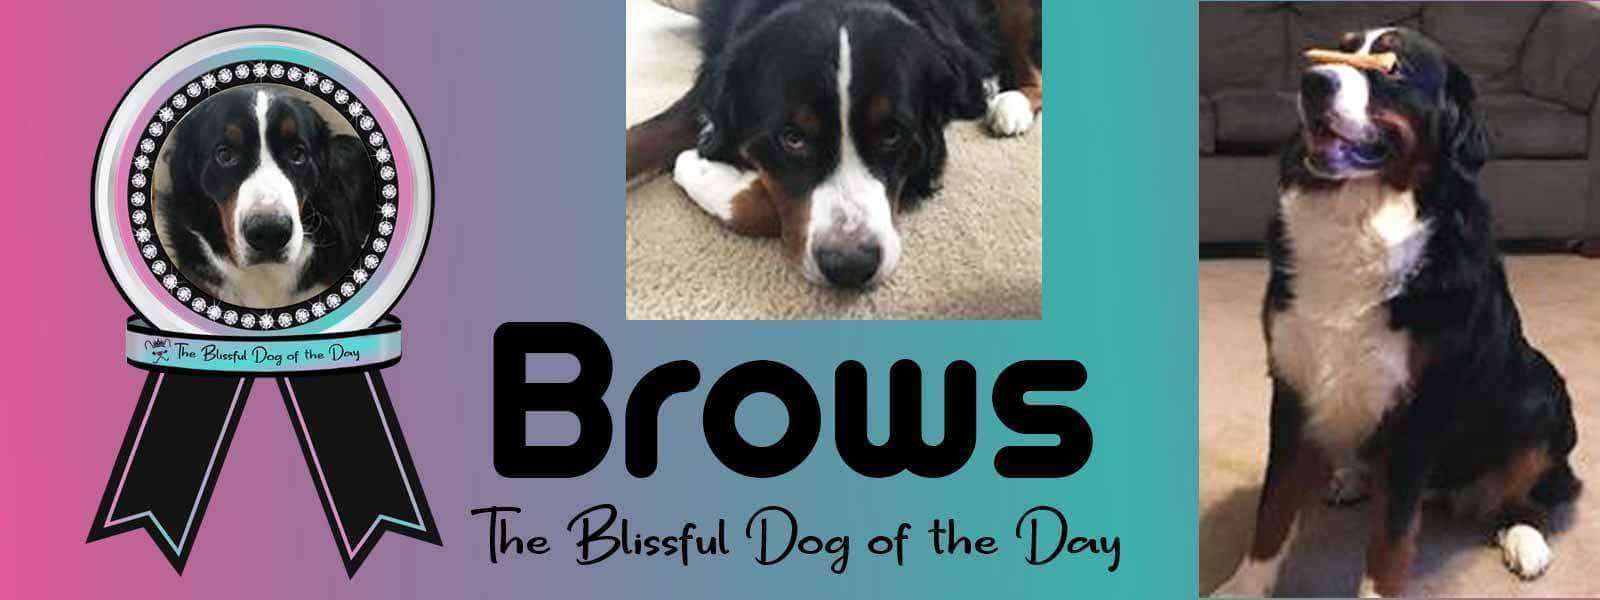 Brows The Most Blissful Berner is The Blissful Dog of the Day